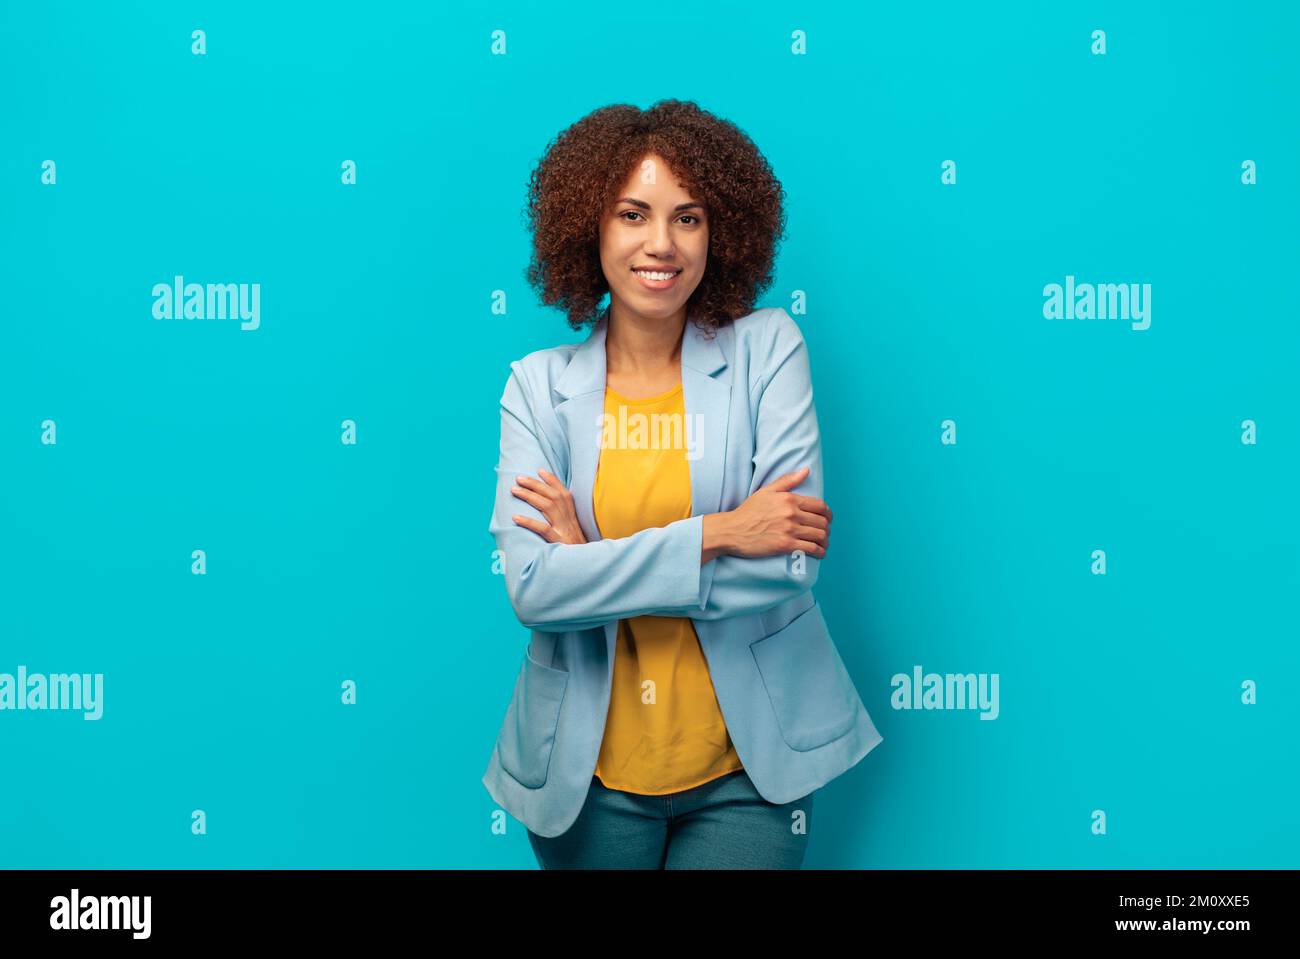 Hiring, career concept smiling successful African American woman with curly hair in jacket on blue background Stock Photo